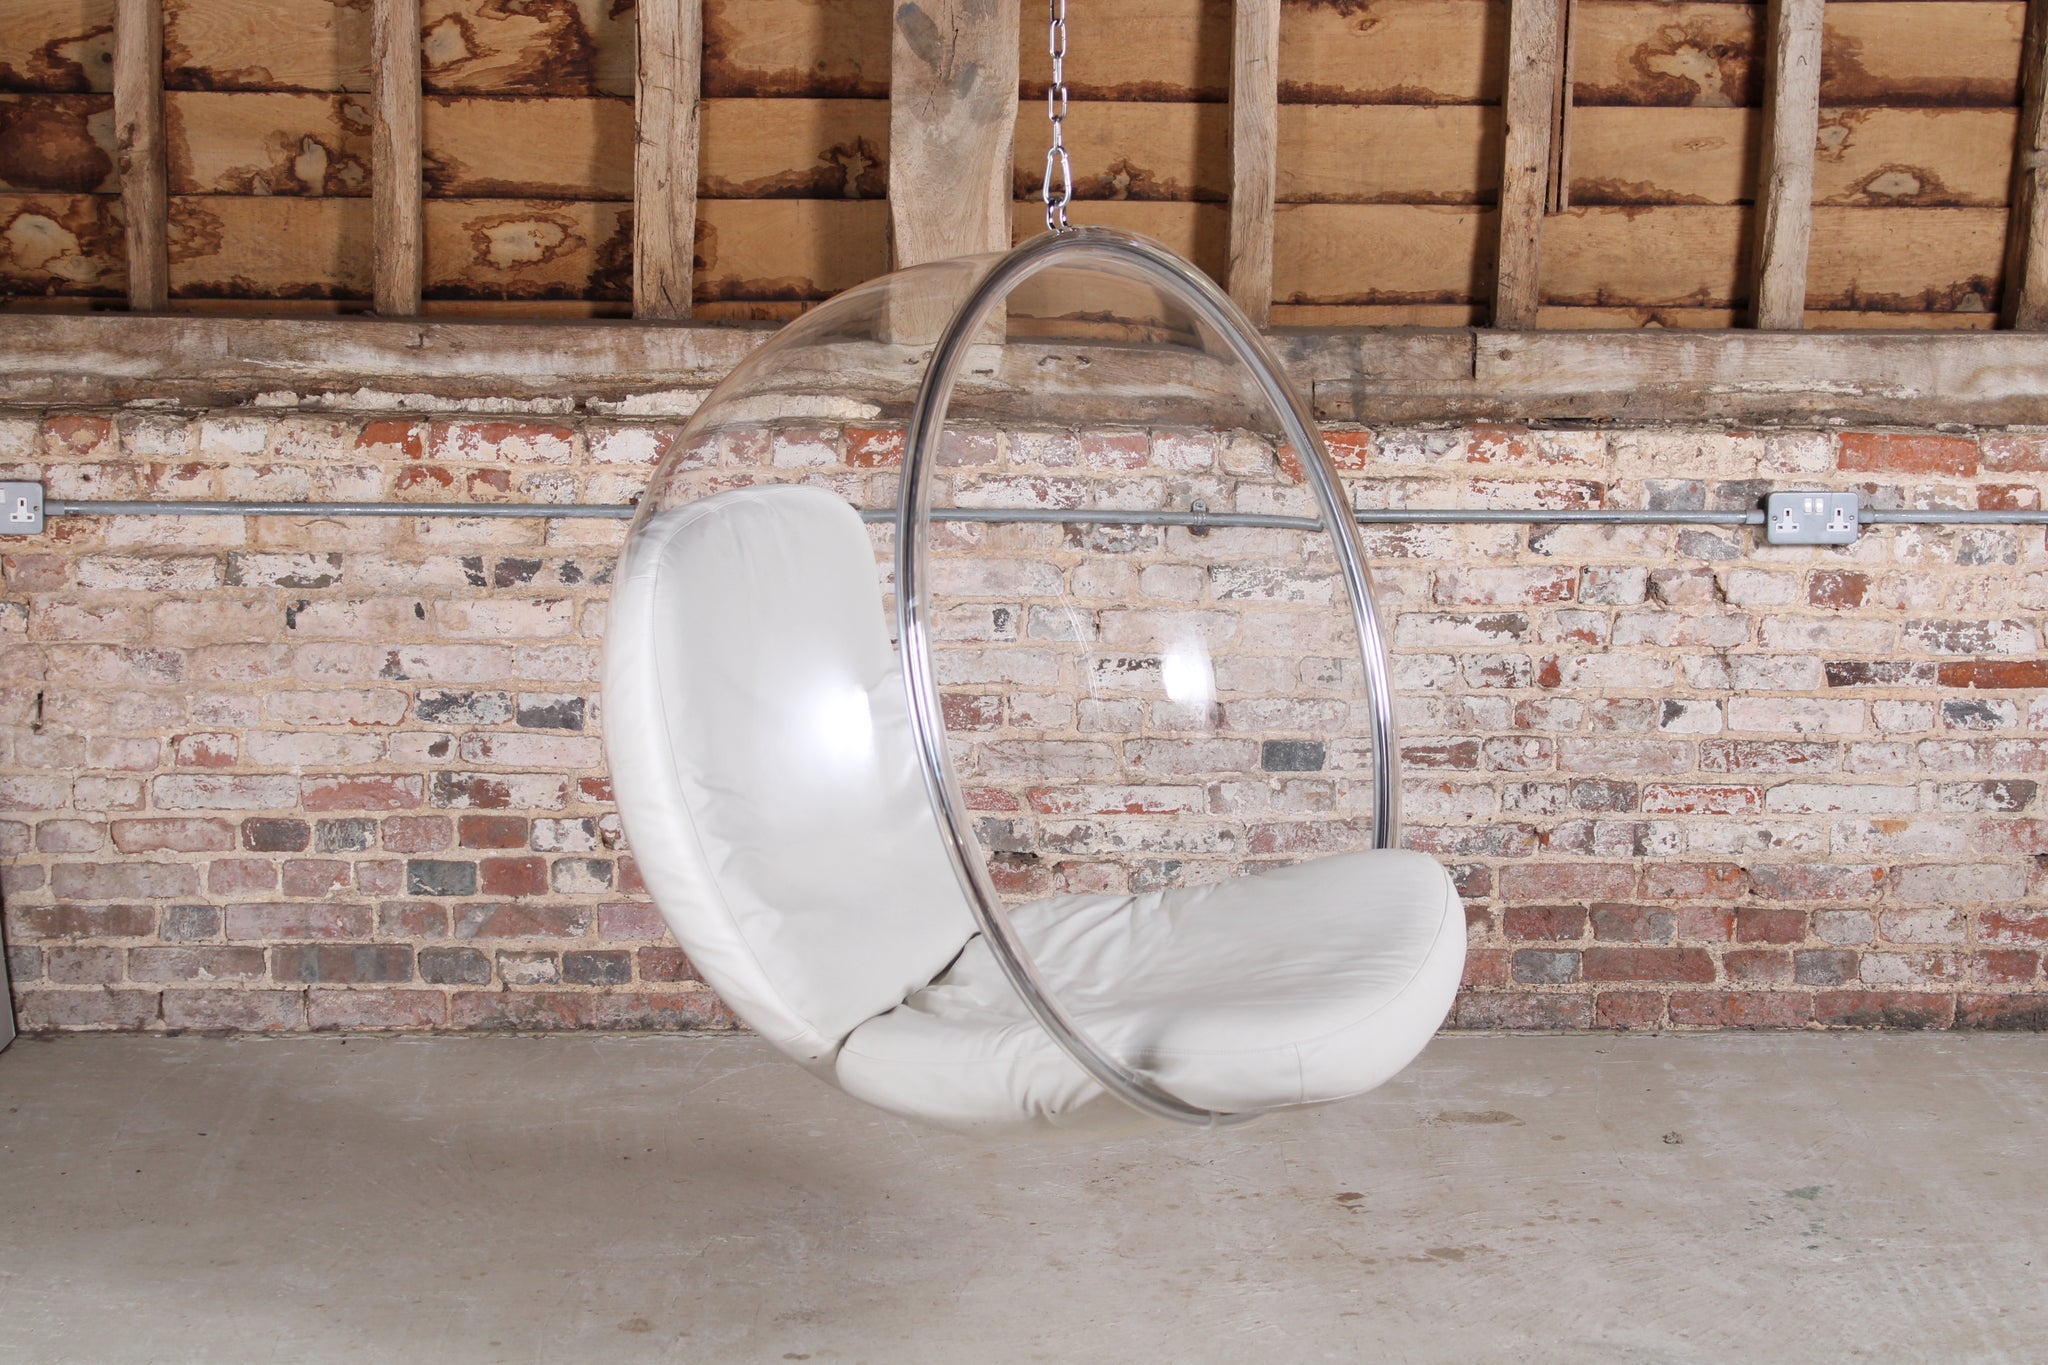 The Bubble chair was designed by Eero Aarnio in 1968. According to Eero’s notes, the Bubble hangs from the ceiling because ‘there is no nice way to make a clear pedestal.’ It shares the same unique acoustics as the Ball Chair, a little cocoon that